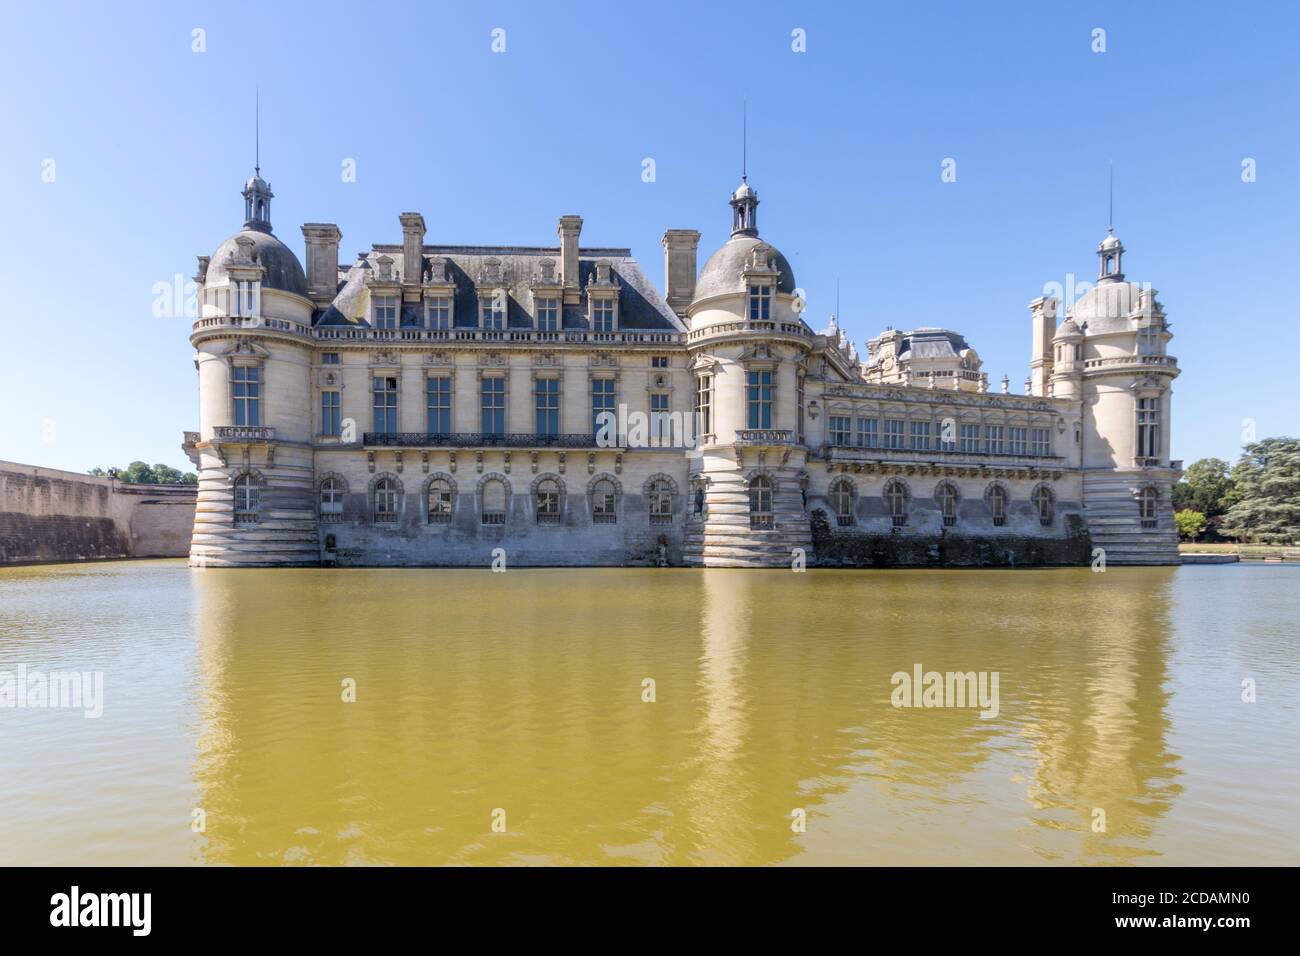 Chantilly city with its romantic parks, castle and stables Stock Photo